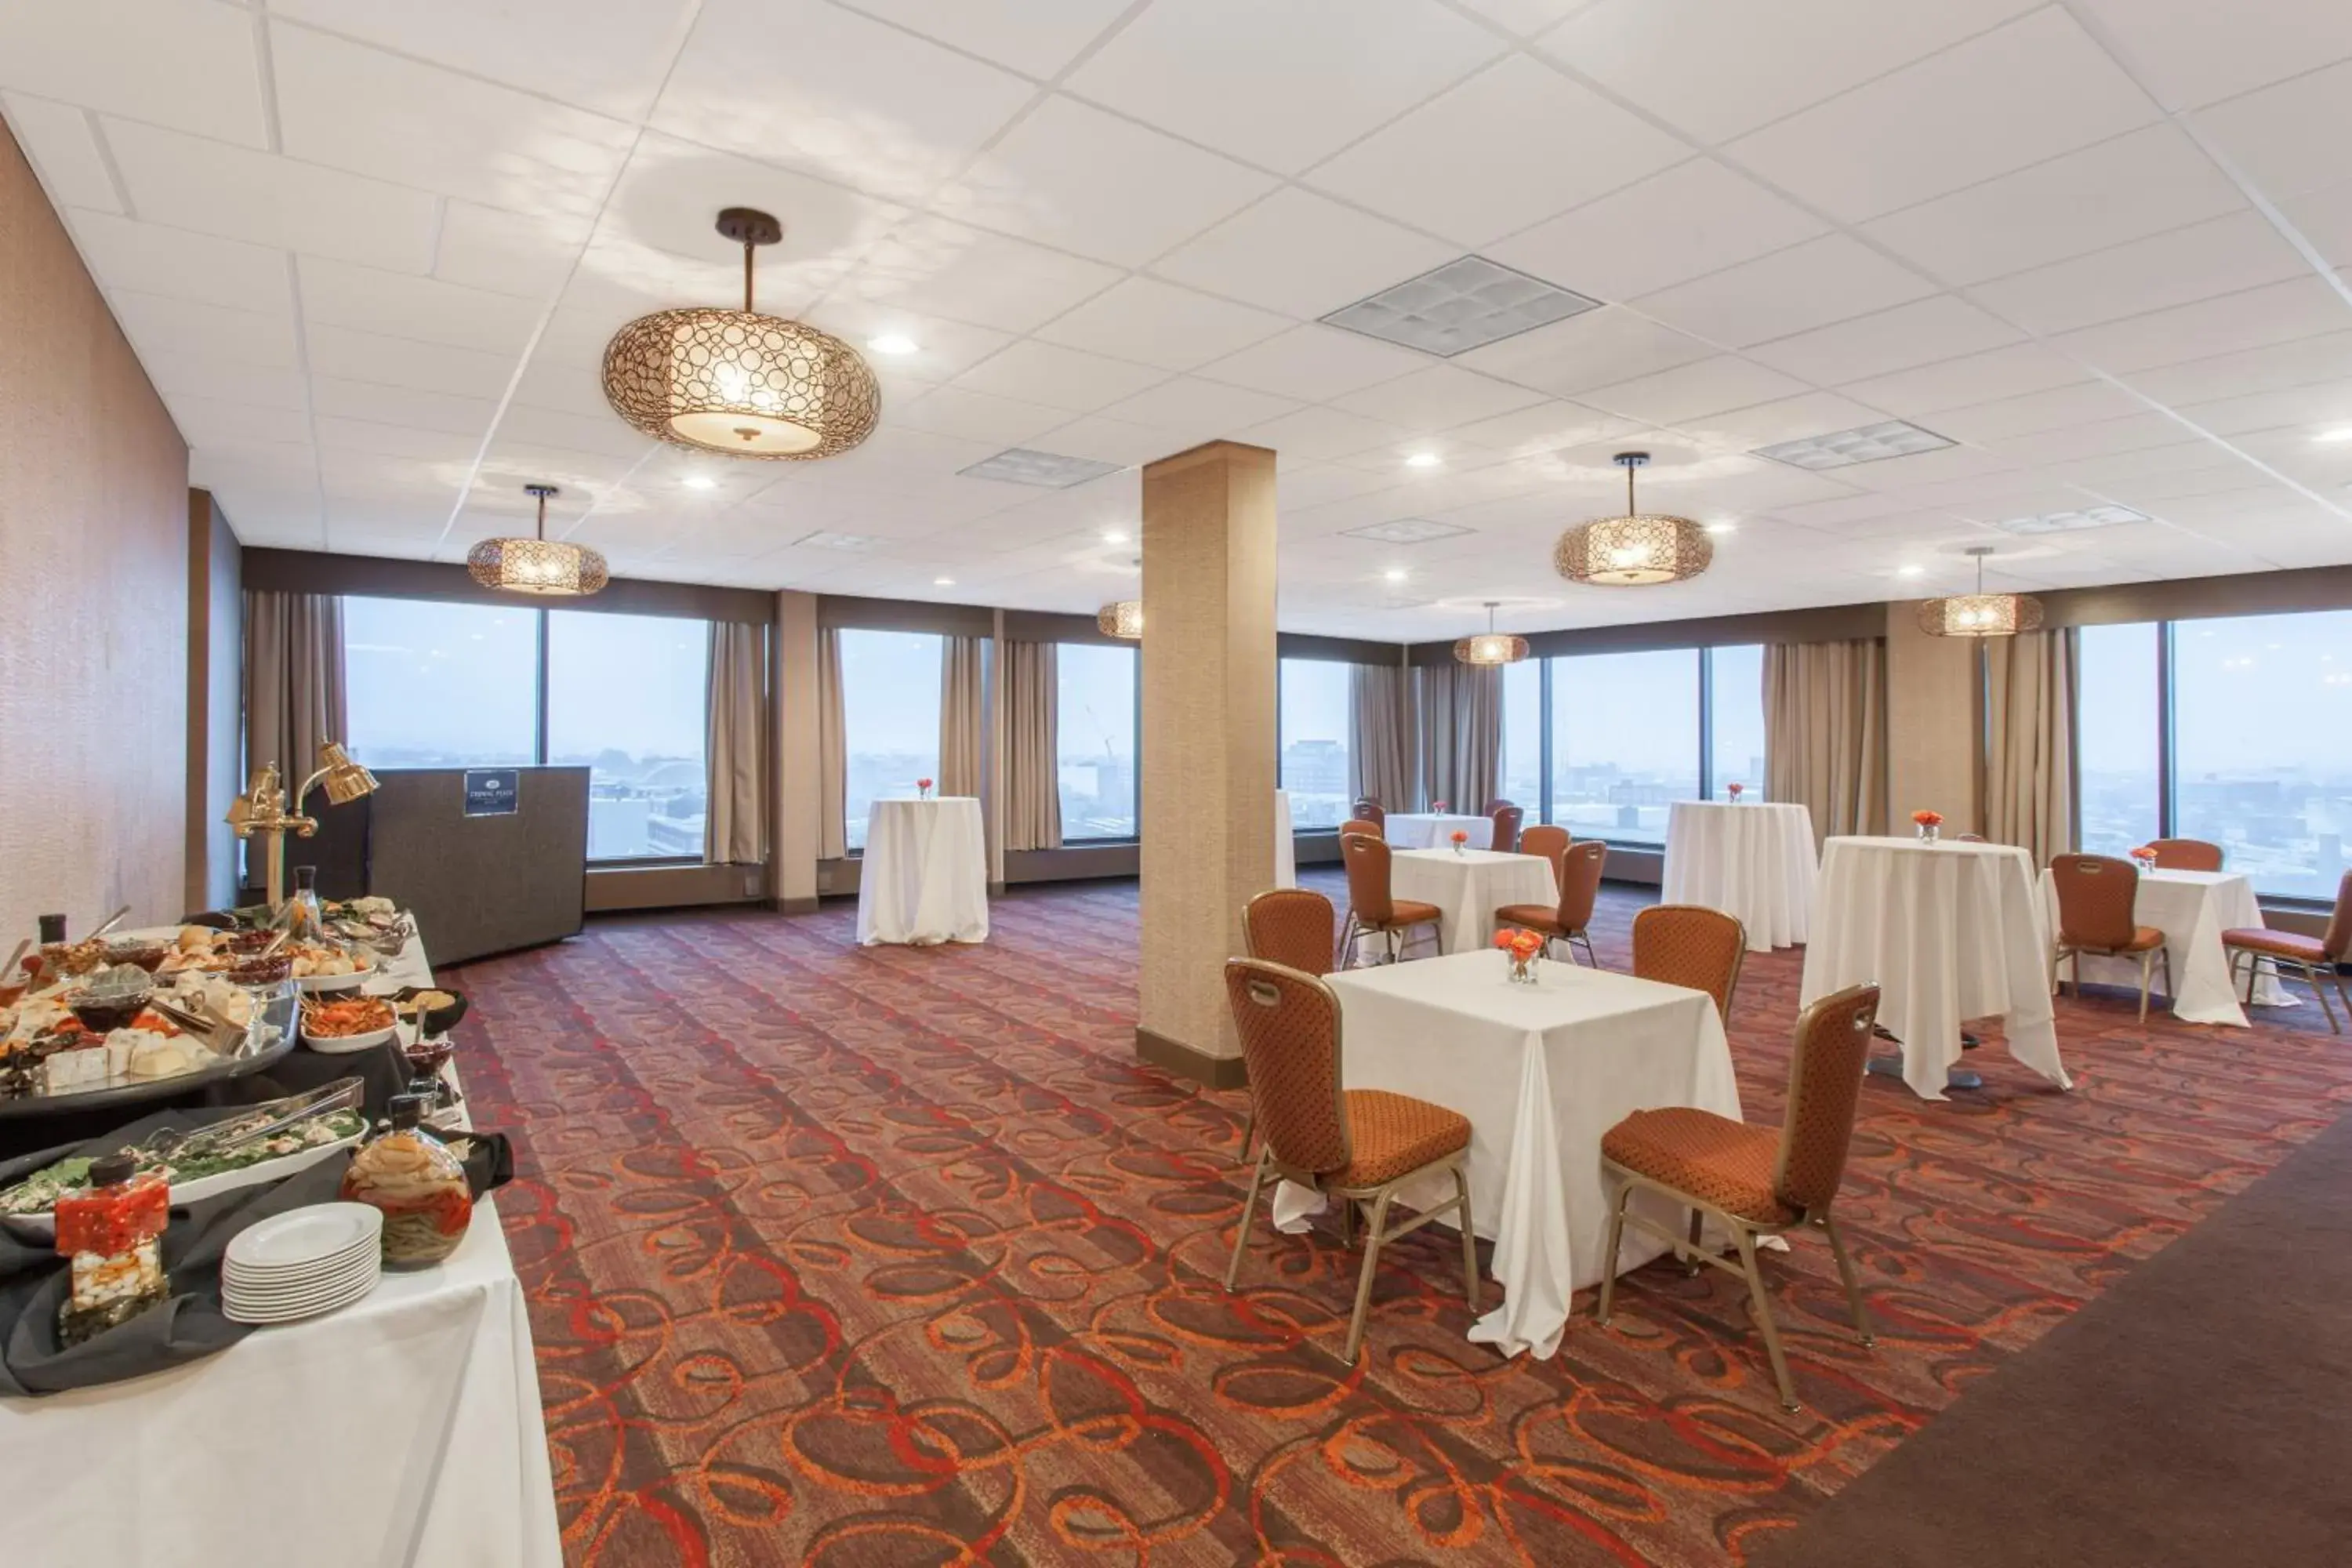 Meeting/conference room, Banquet Facilities in Radisson Dayton Convention Center